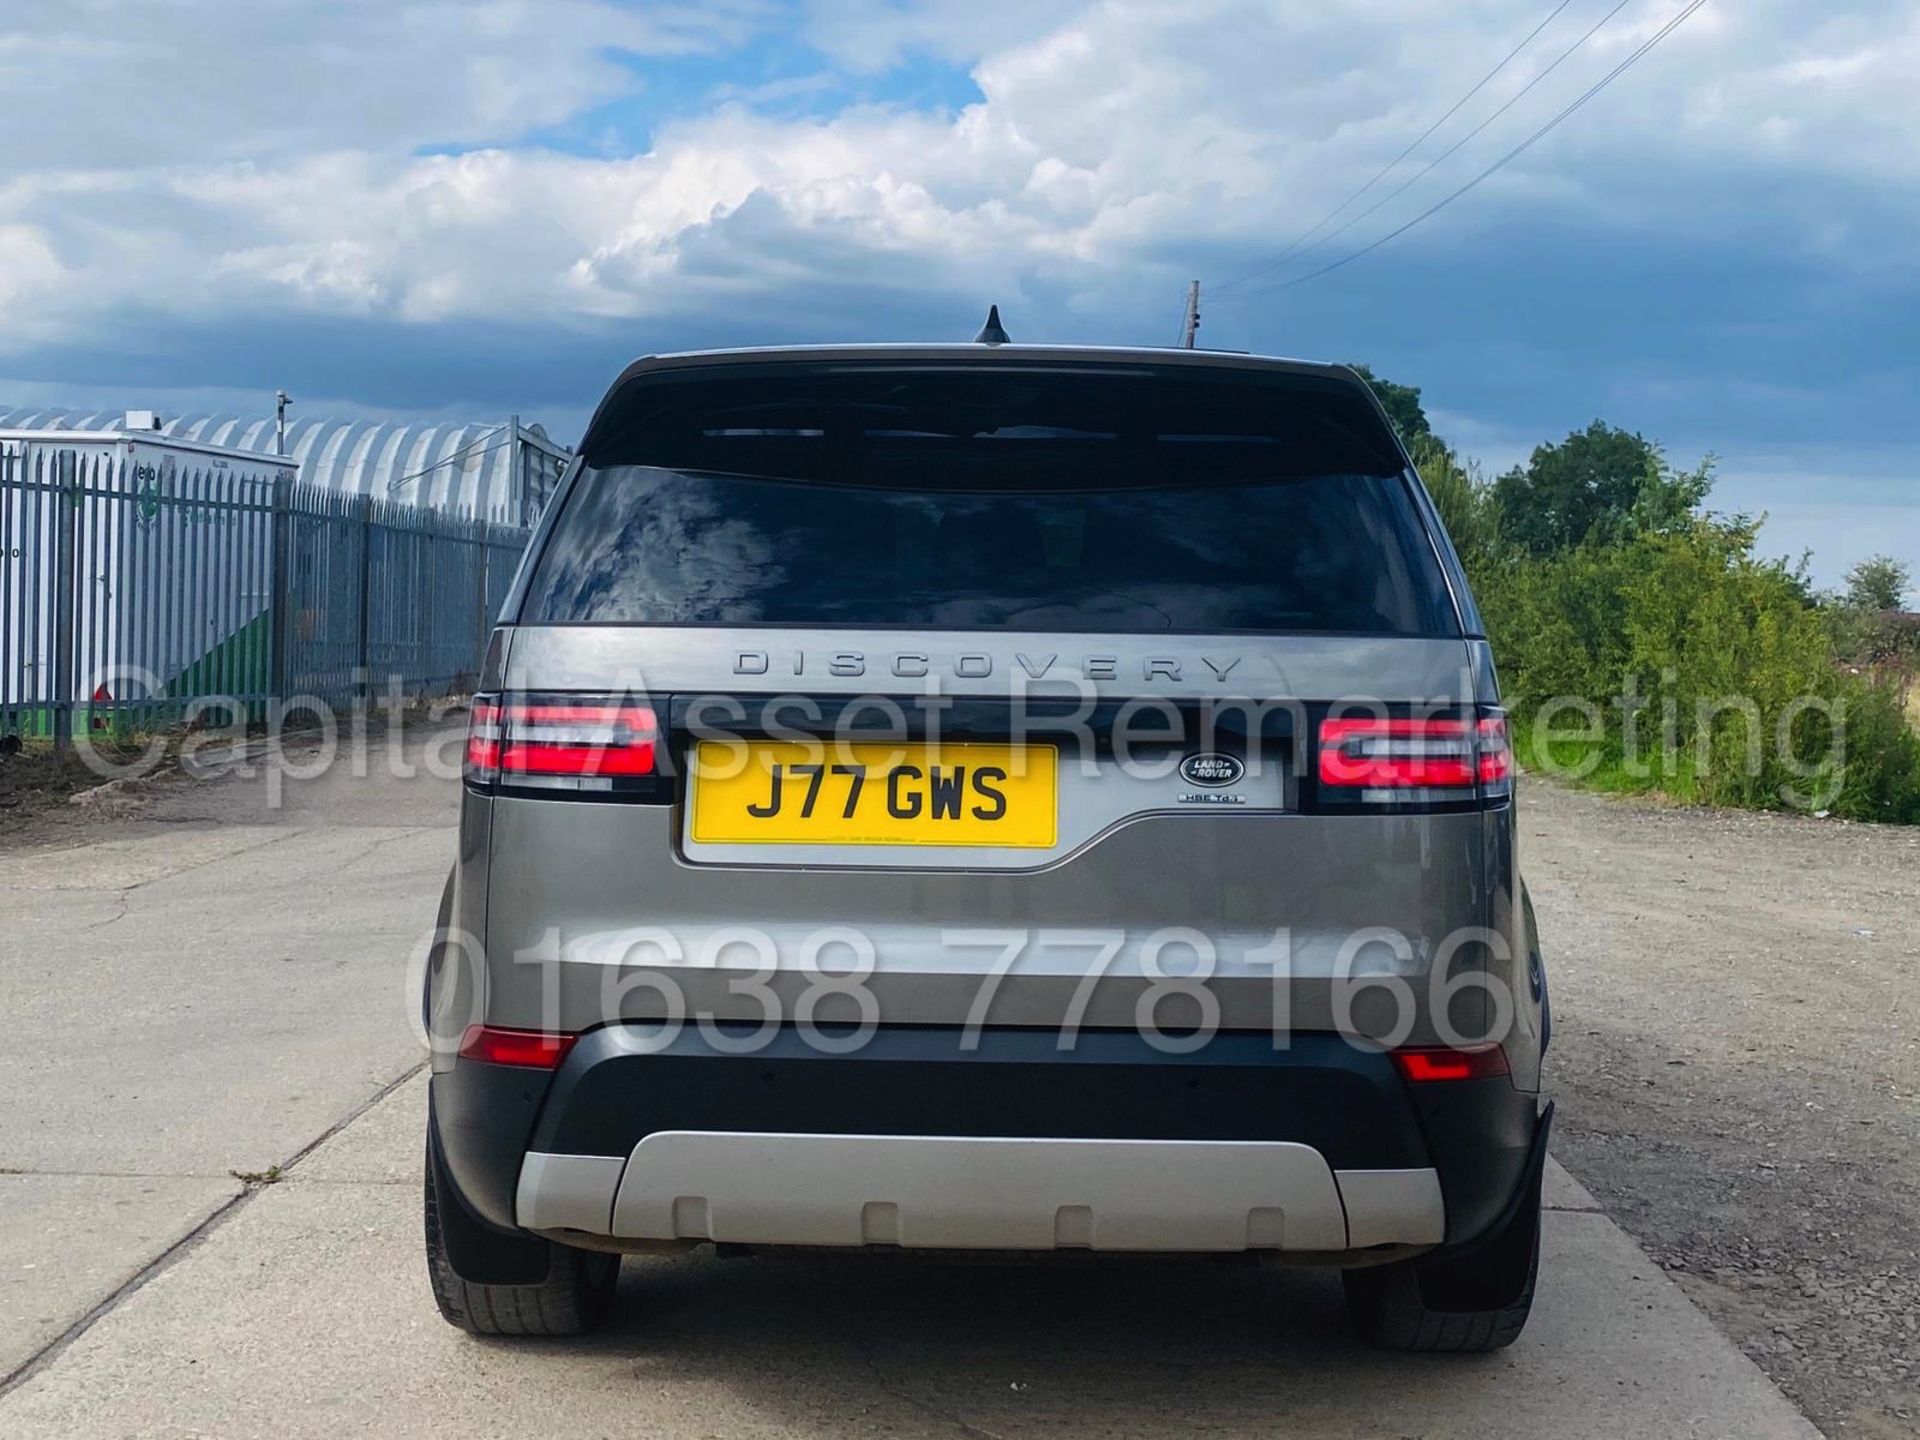 (On Sale) LAND ROVER DISCOVERY *HSE* 7 SEATER (2017 - NEW MODEL) '3.0 TD6 - 258 BHP - 8 SPEED AUTO' - Image 11 of 68